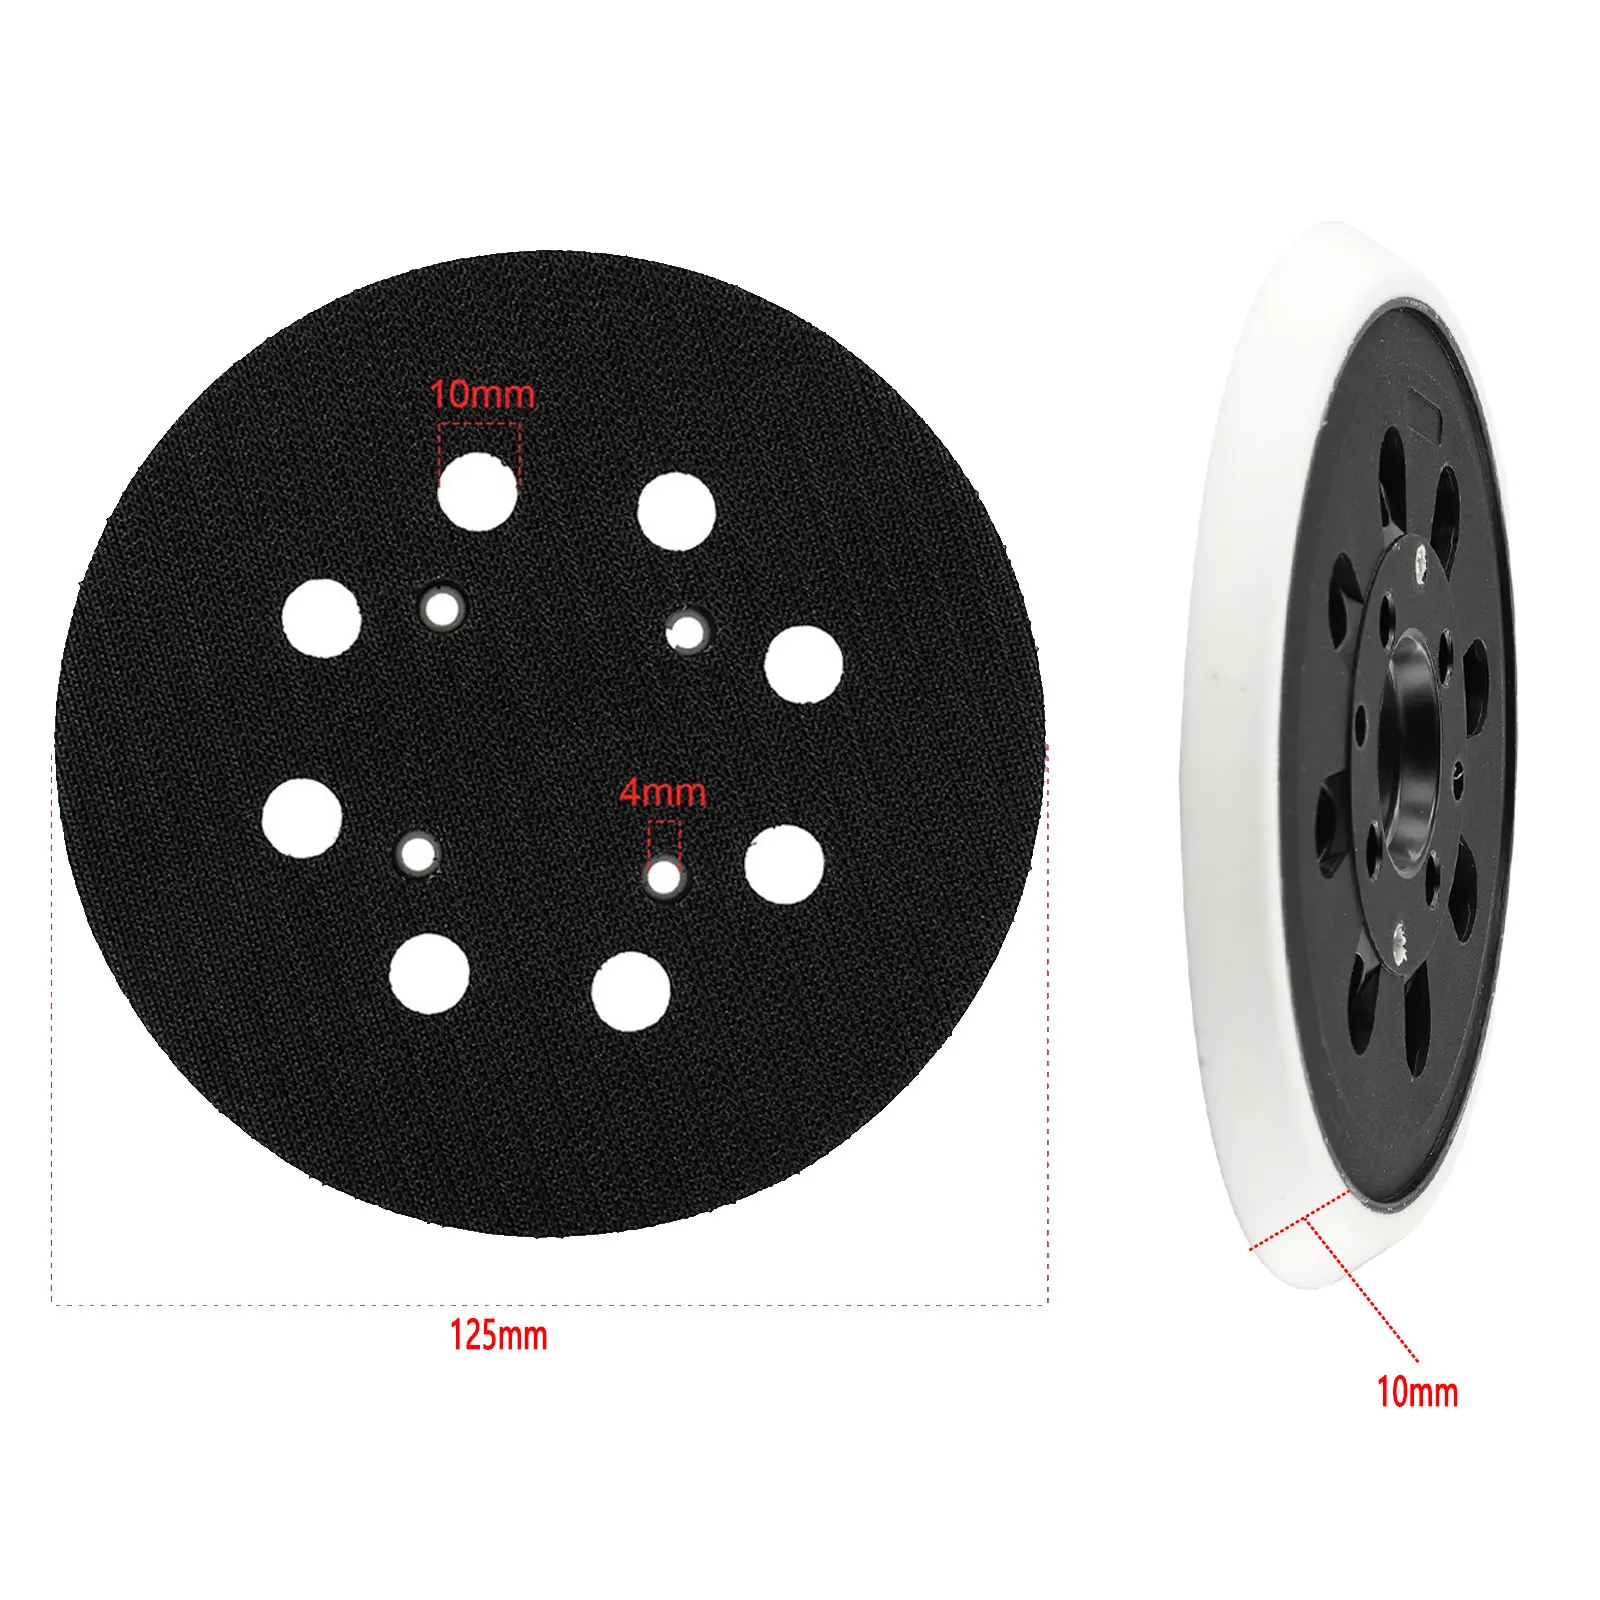 5 Inch 125mm Backing Pad Sanding Pad Hook&loop Connection For Bosch PEX 300 AE 400 AE 4000 AE Power Tools Accessories